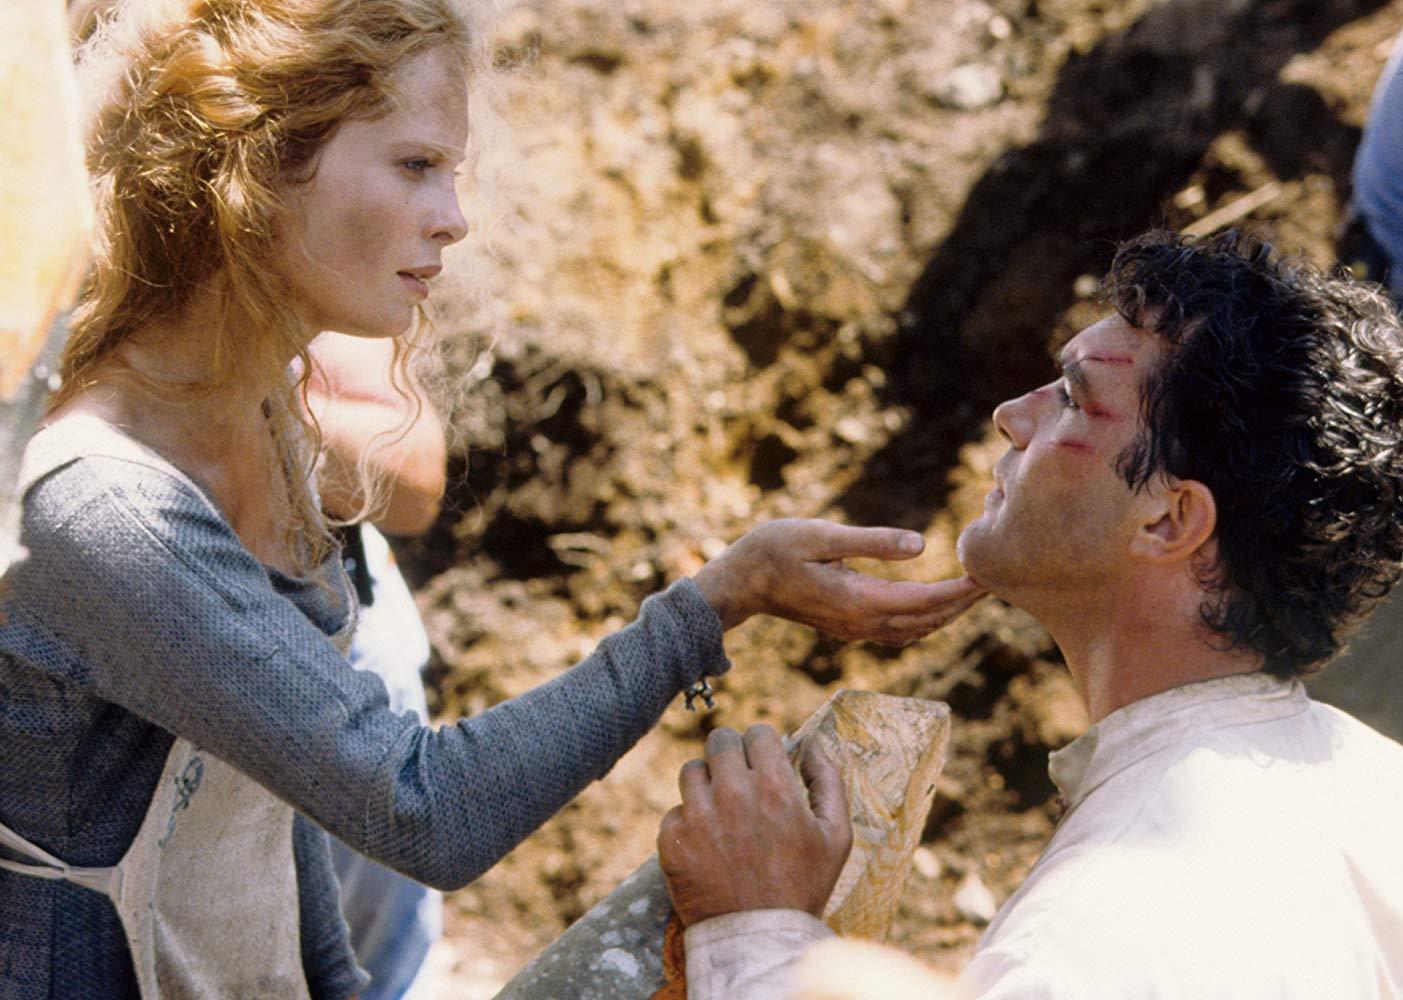 A woman tends to a wounded Antonio Banderas